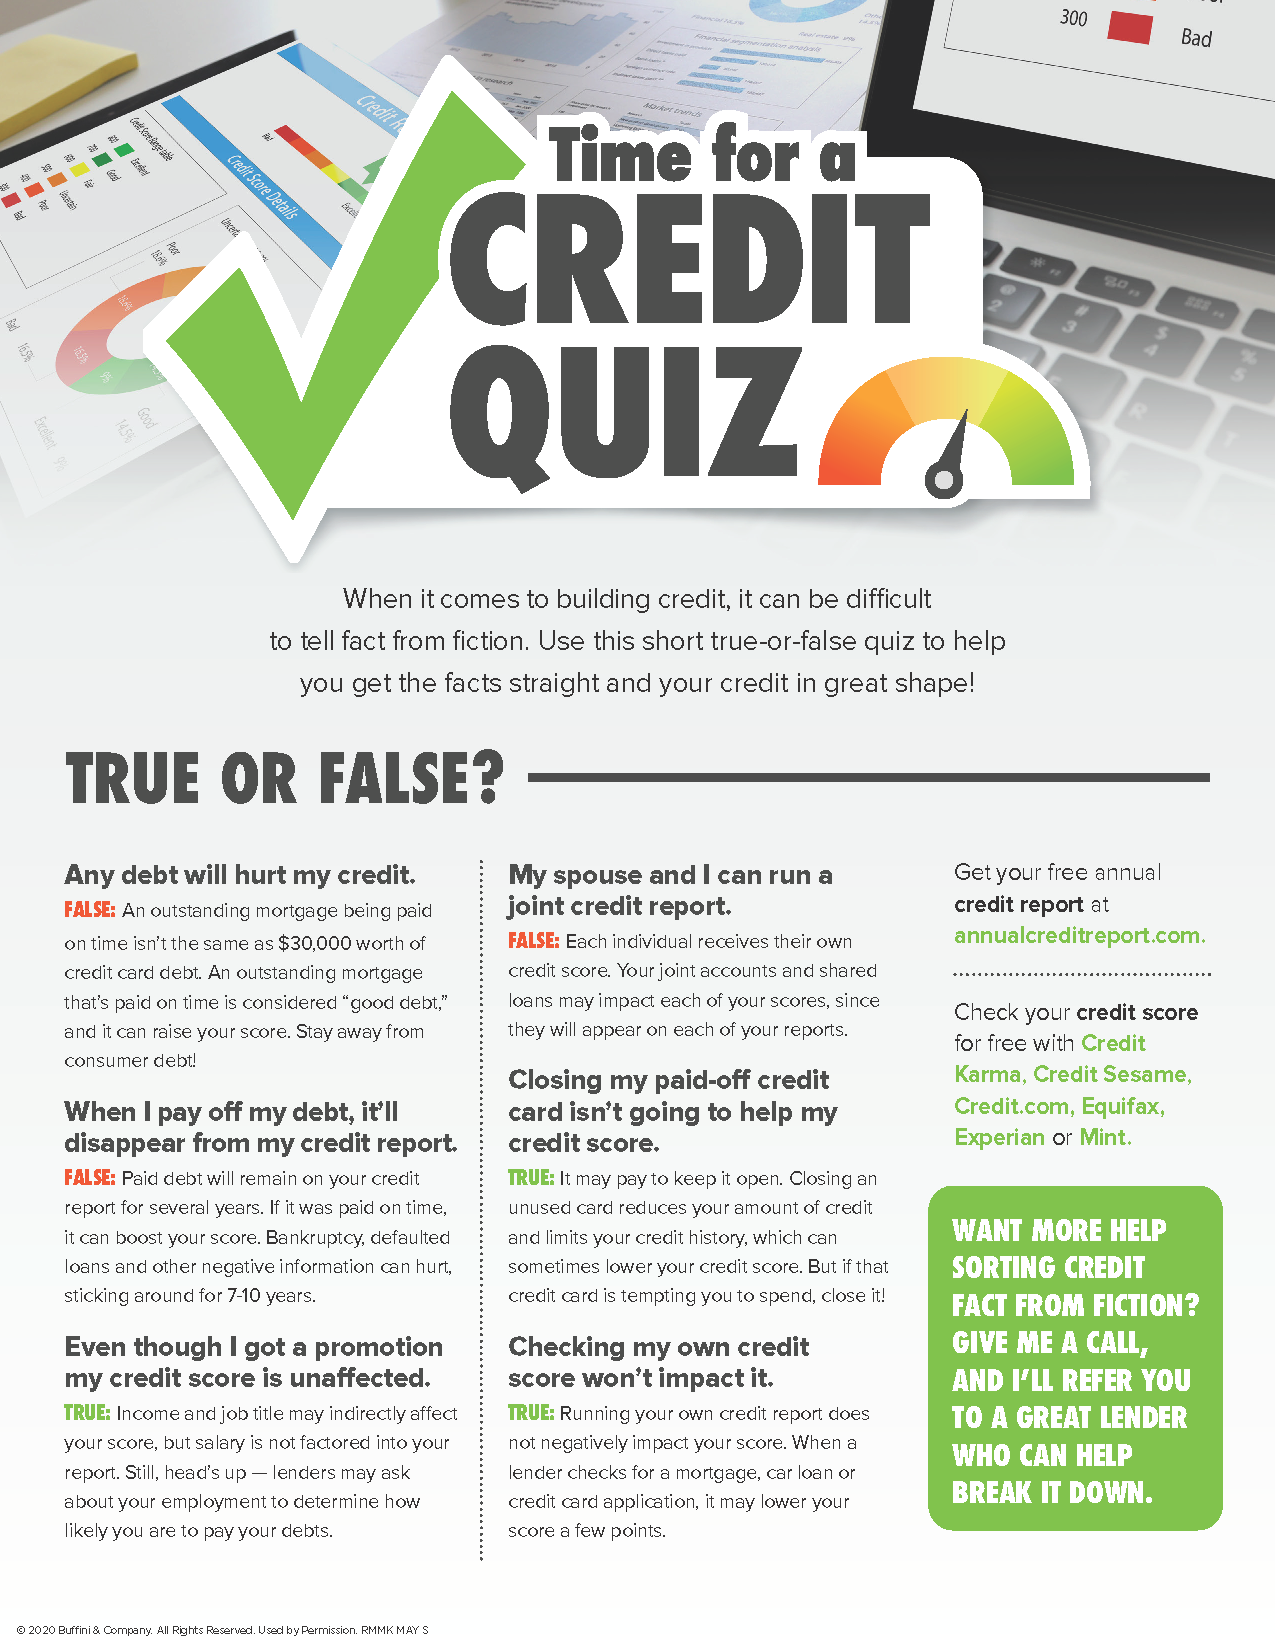 How to build your credit